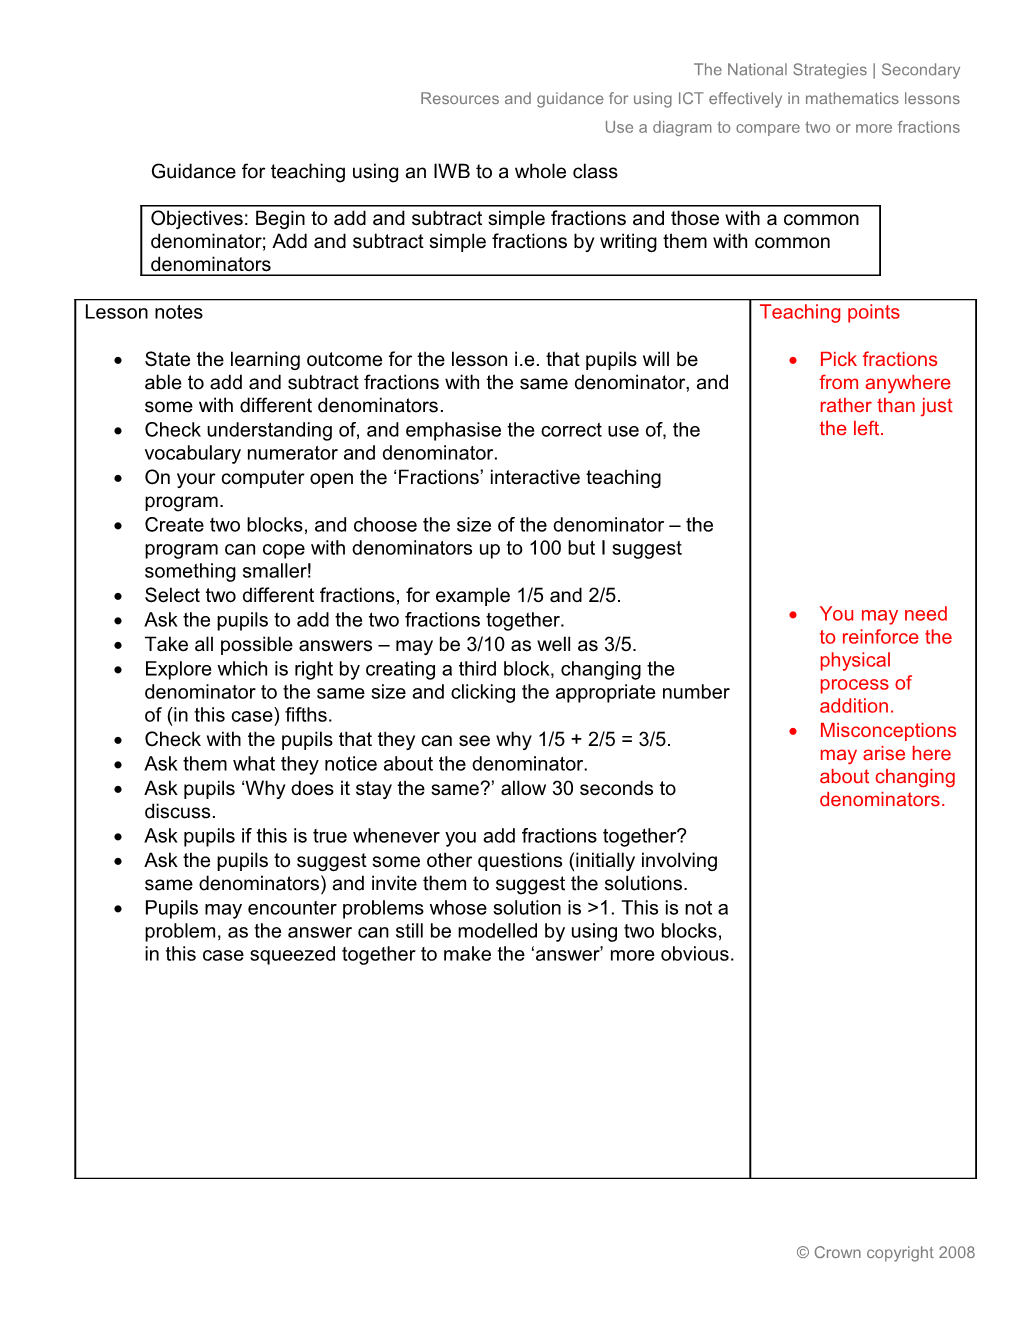 Guidance for Teaching Using an IWB to a Whole Class